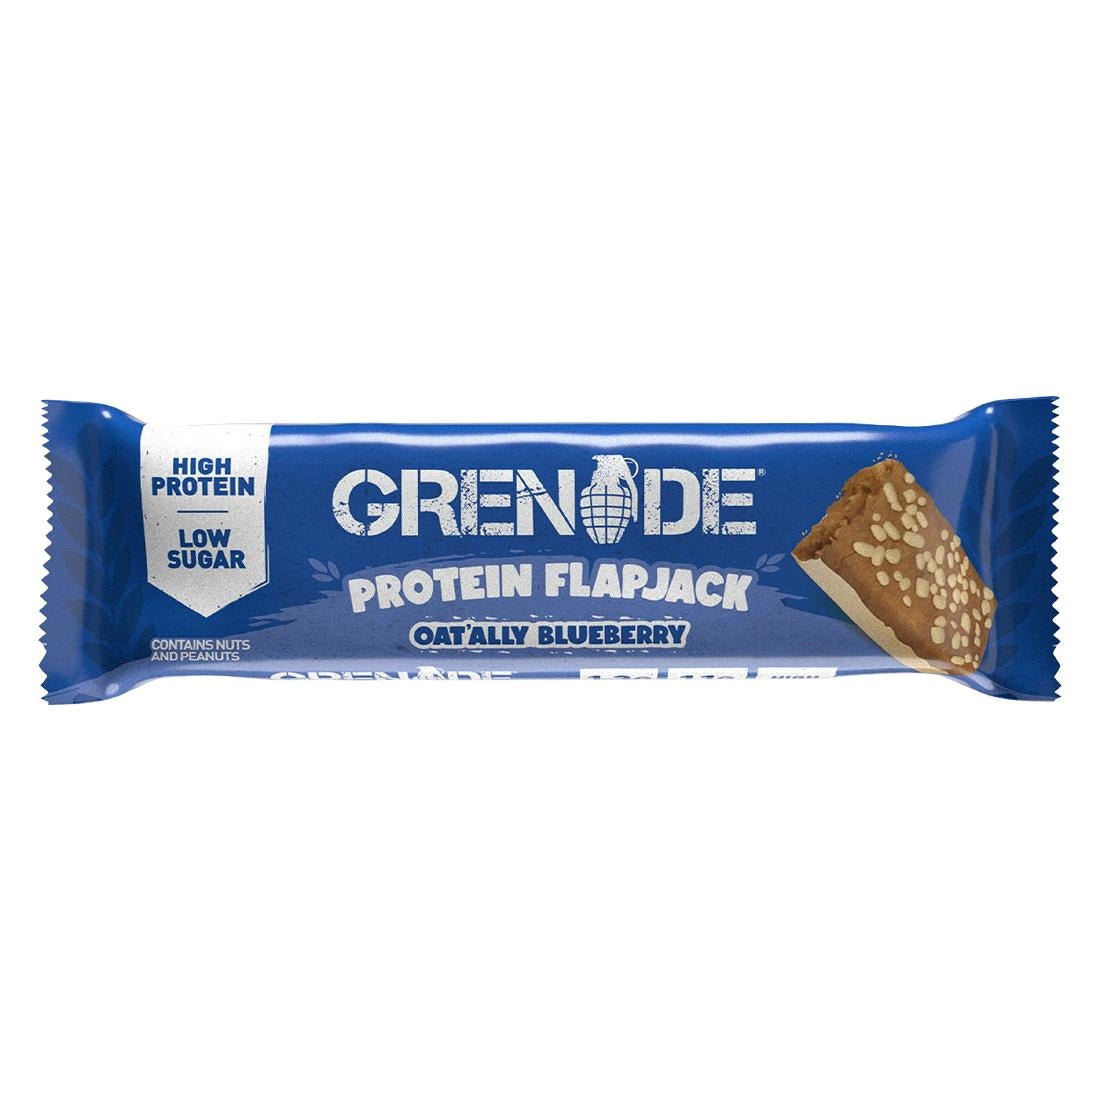 HS868 Grenade Oat'ally Blueberry Protein Flapjack 45g (Pack of 12)